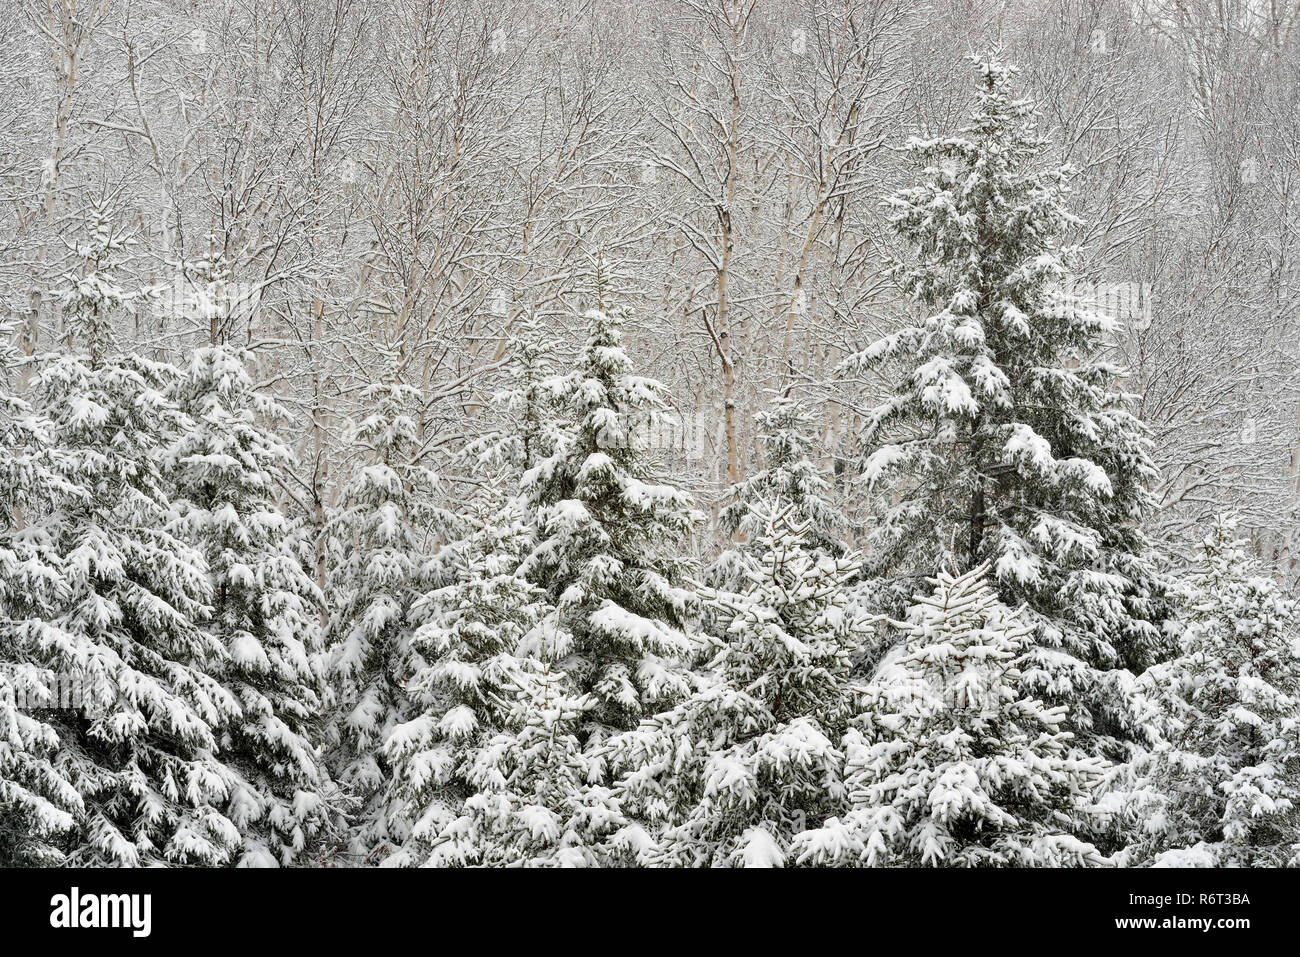 An early winter snowfall in  a mixed forest on a hillside, Greater Sudbury, Ontario, Canada Stock Photo